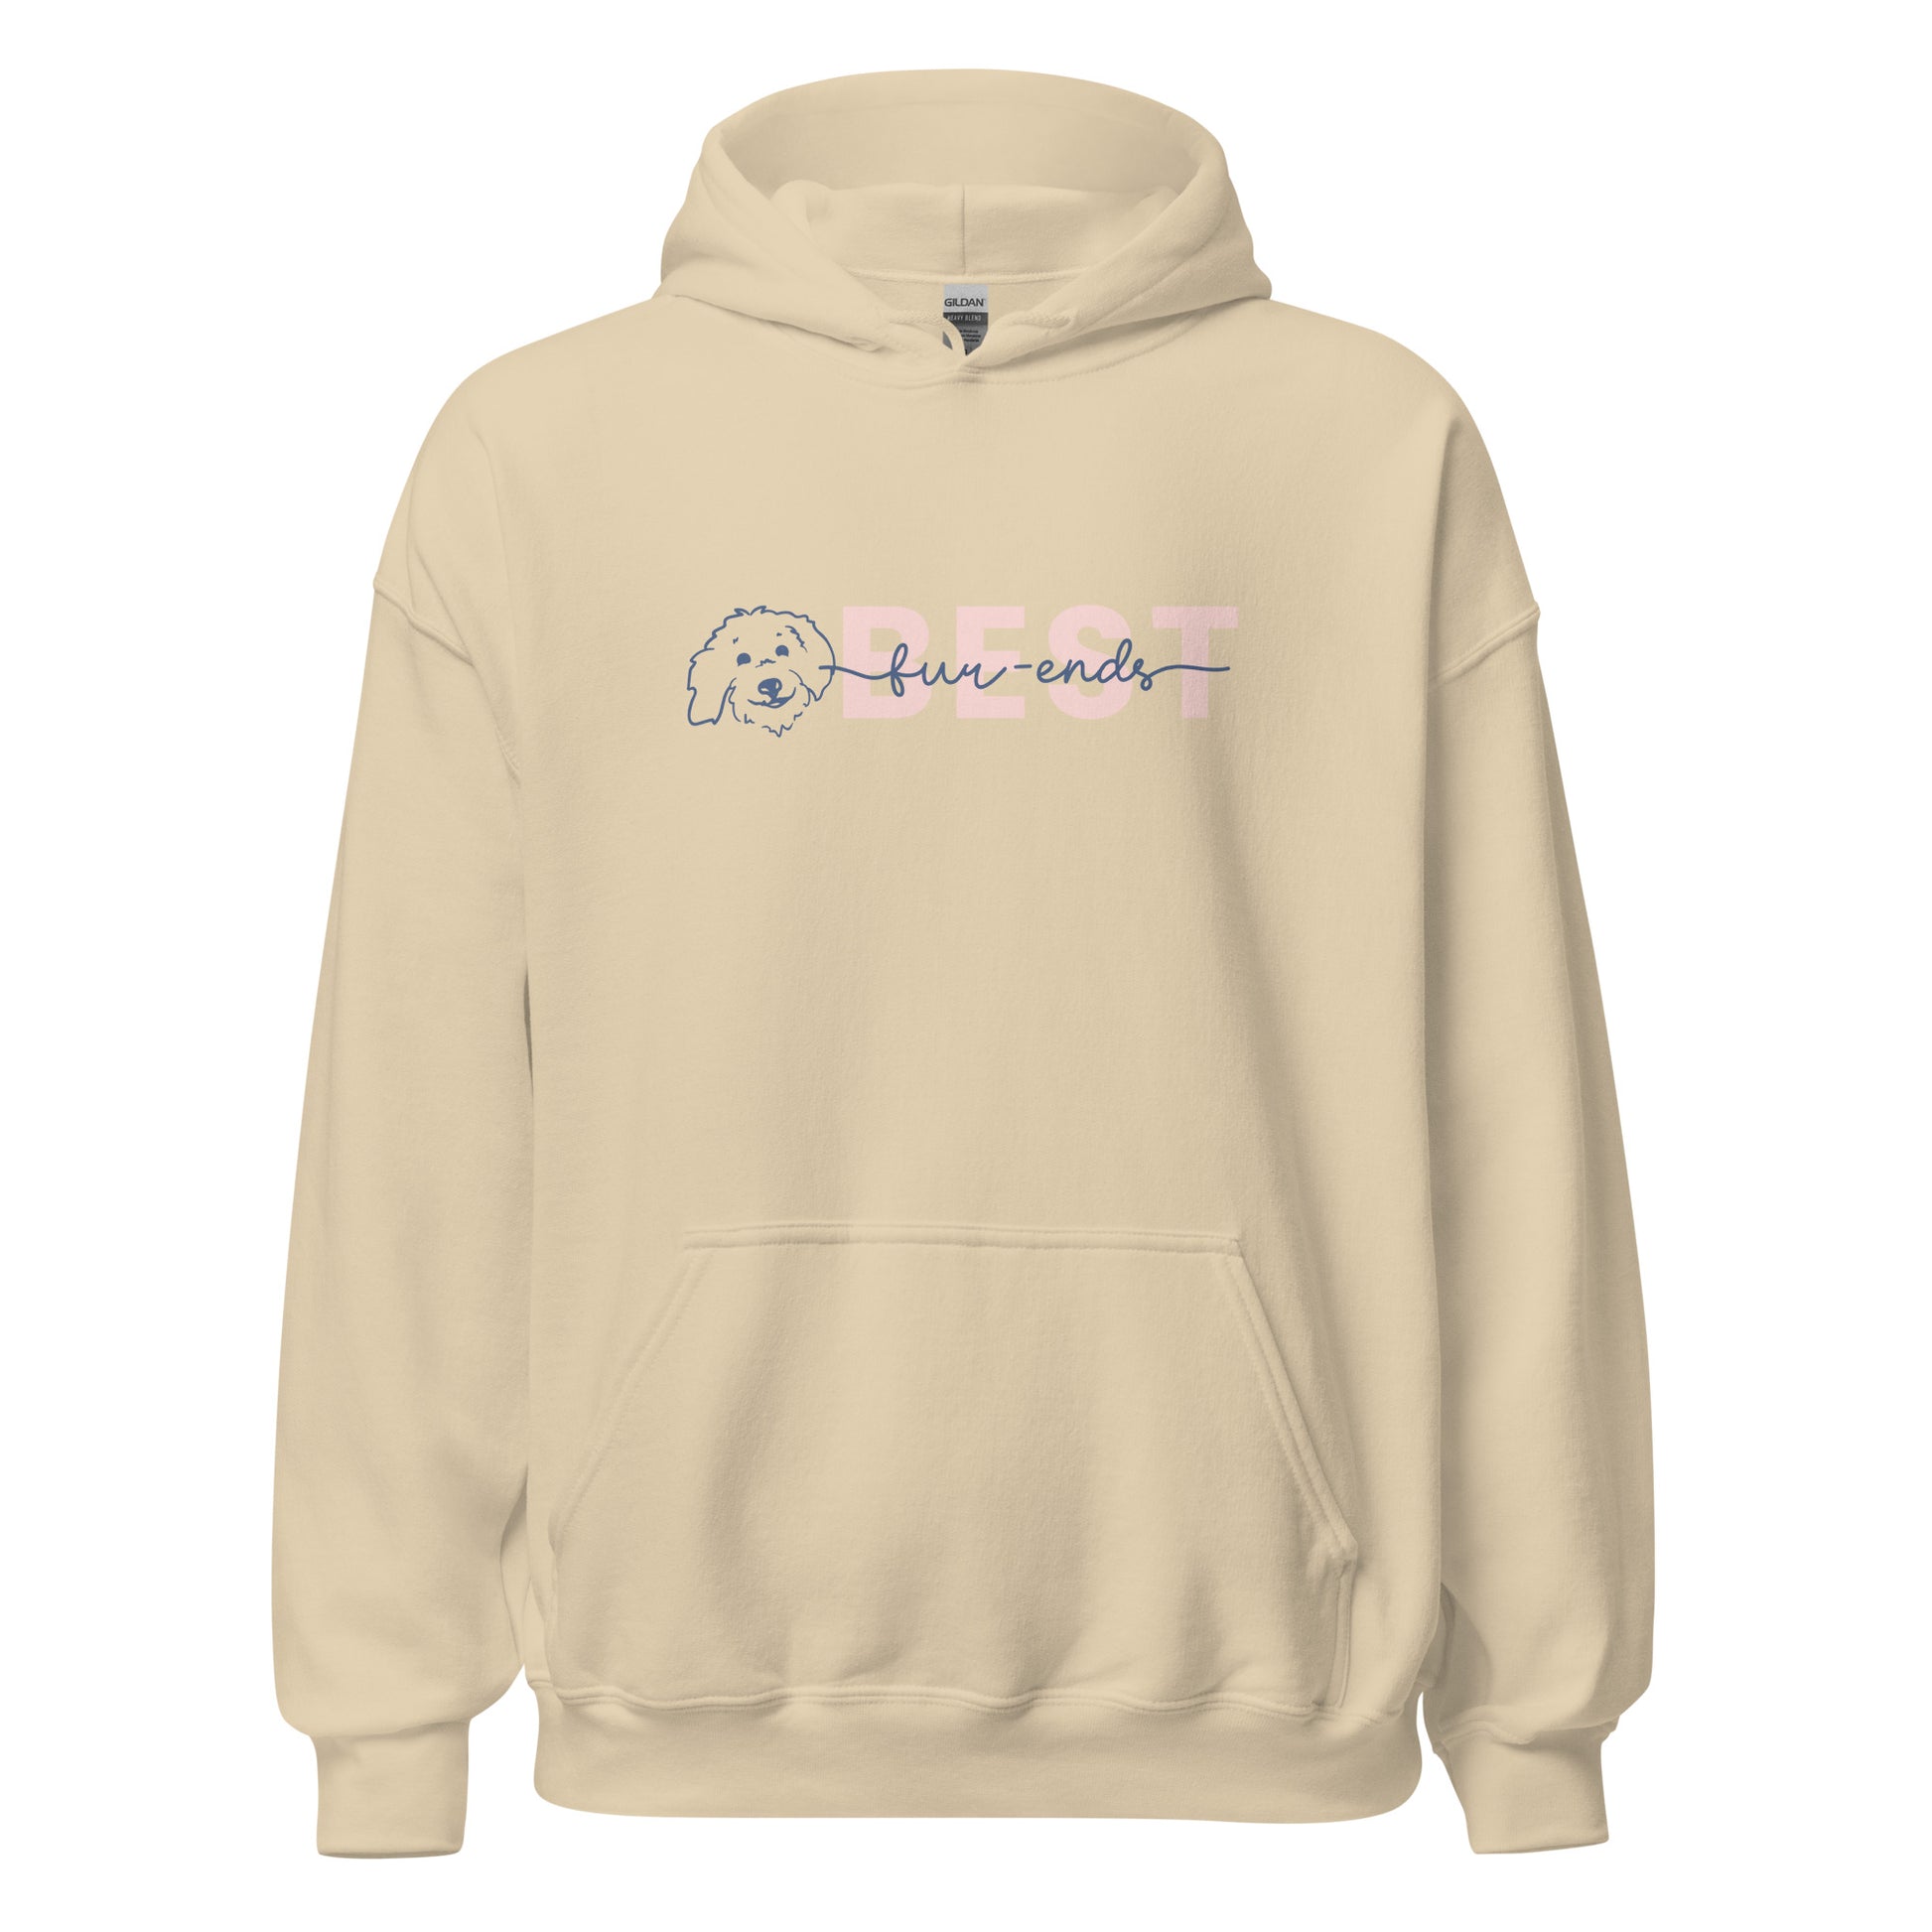 Goldendoodle hoodie sweatshirt with Goldendoodle face and words "Best fur-Ends" in sand color